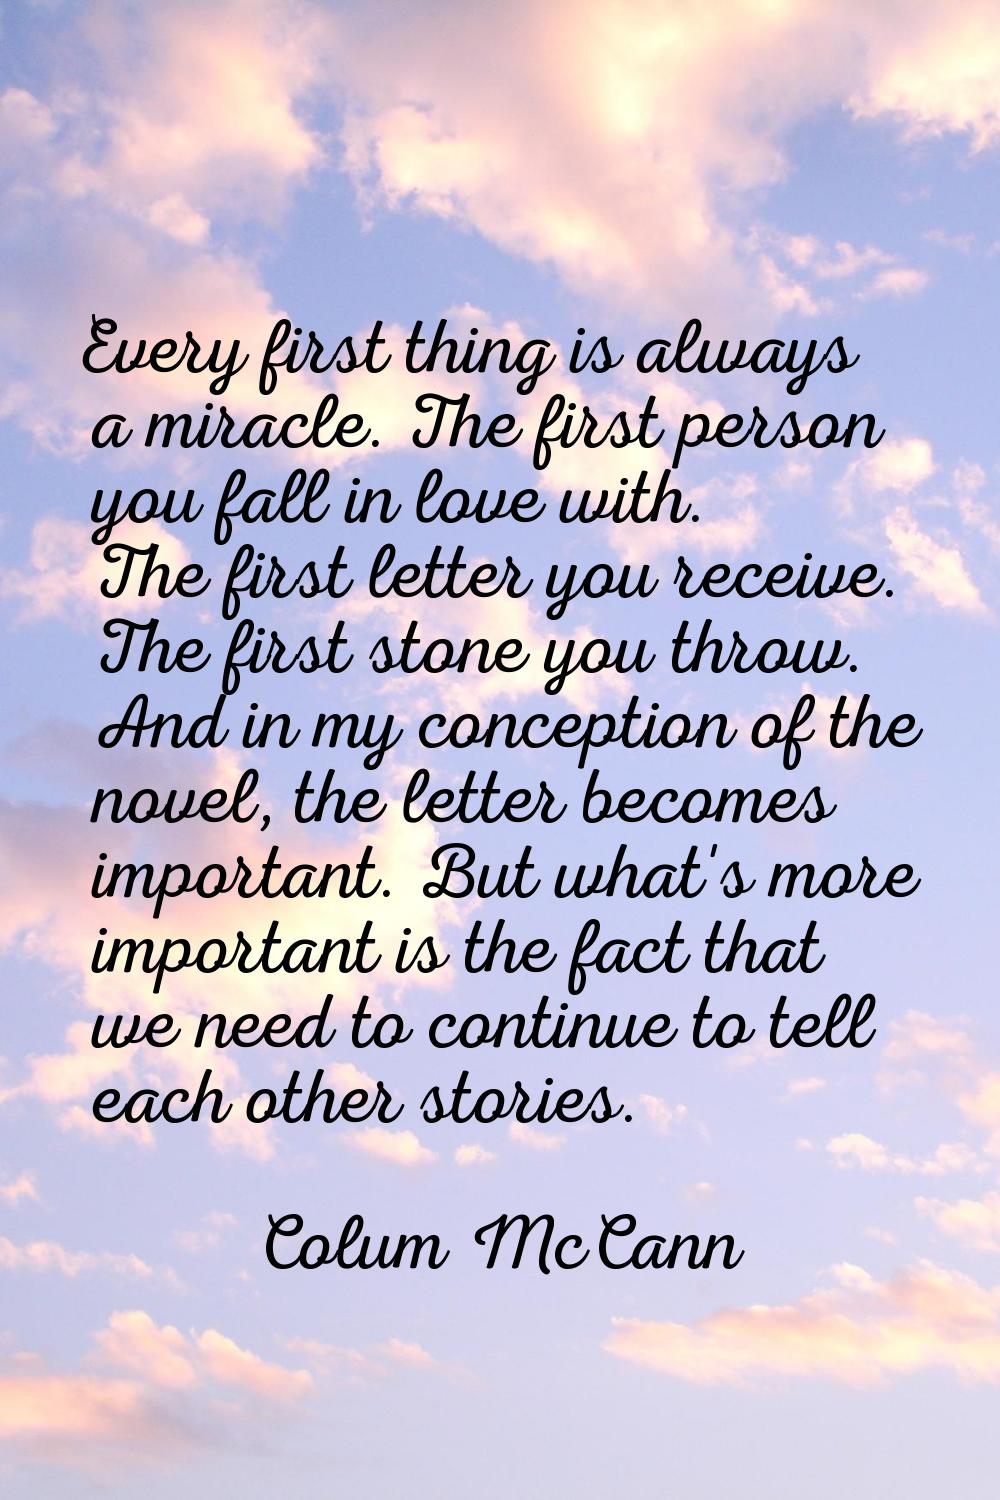 Every first thing is always a miracle. The first person you fall in love with. The first letter you